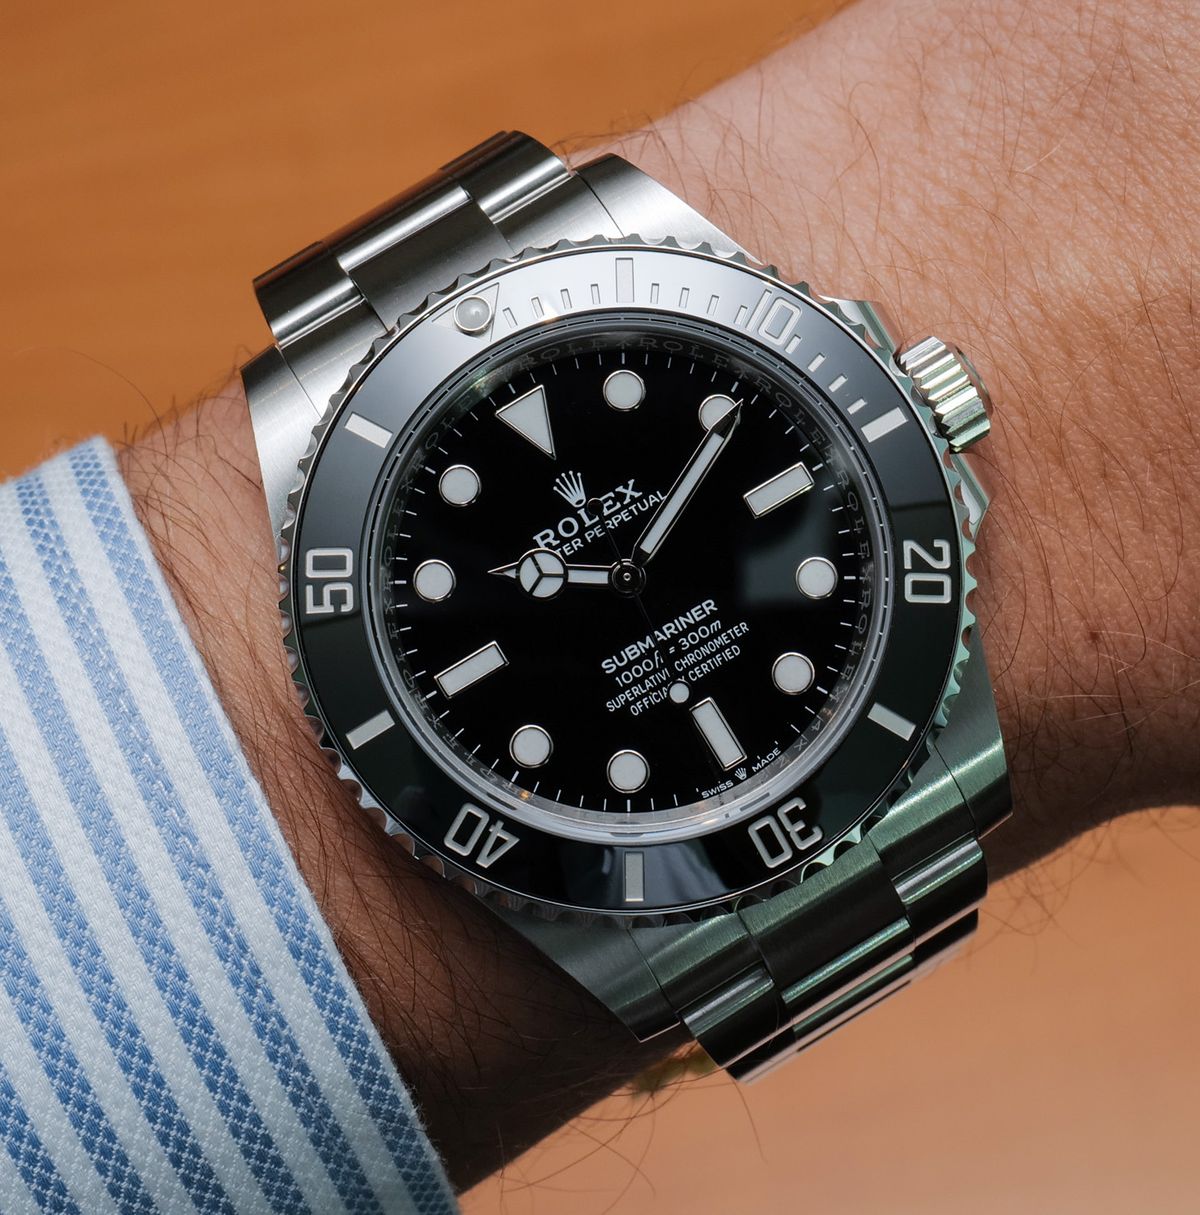 New Rolex Watches of - Official Release Guide by Bobs Watches